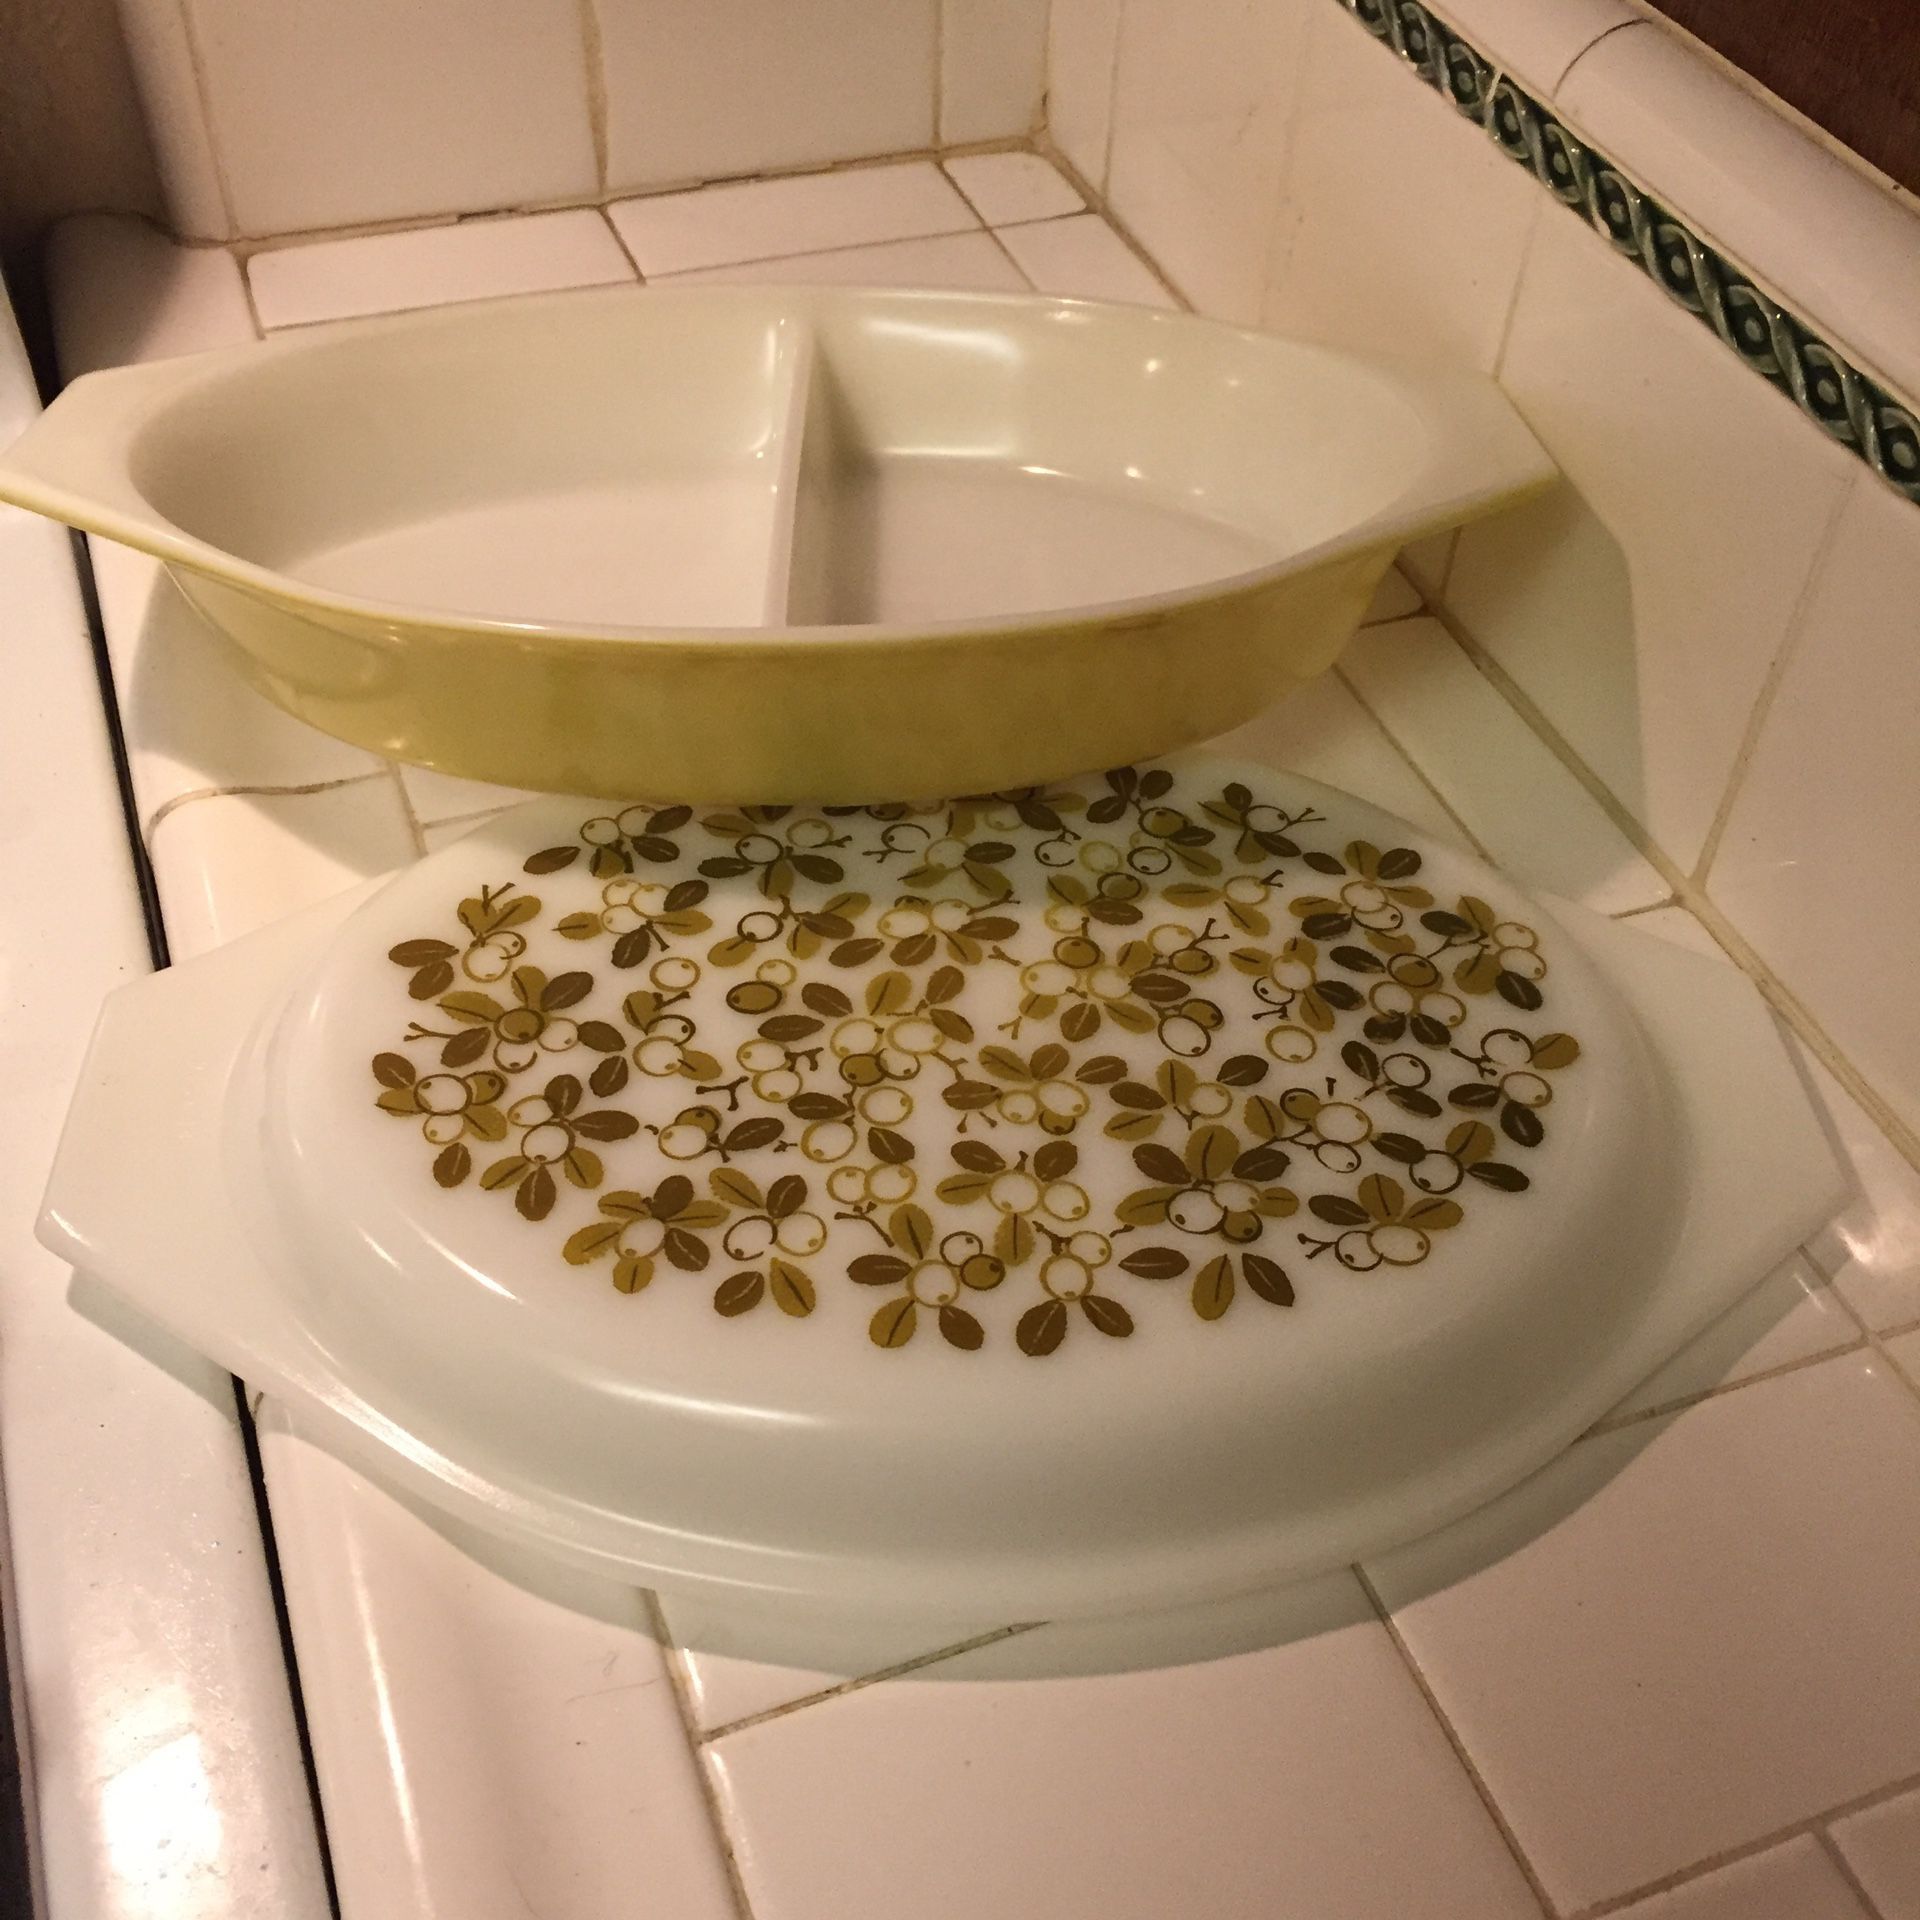 VINTAGE PYREX CASSEROLE DISH WITH LID - OLIVE GREEN